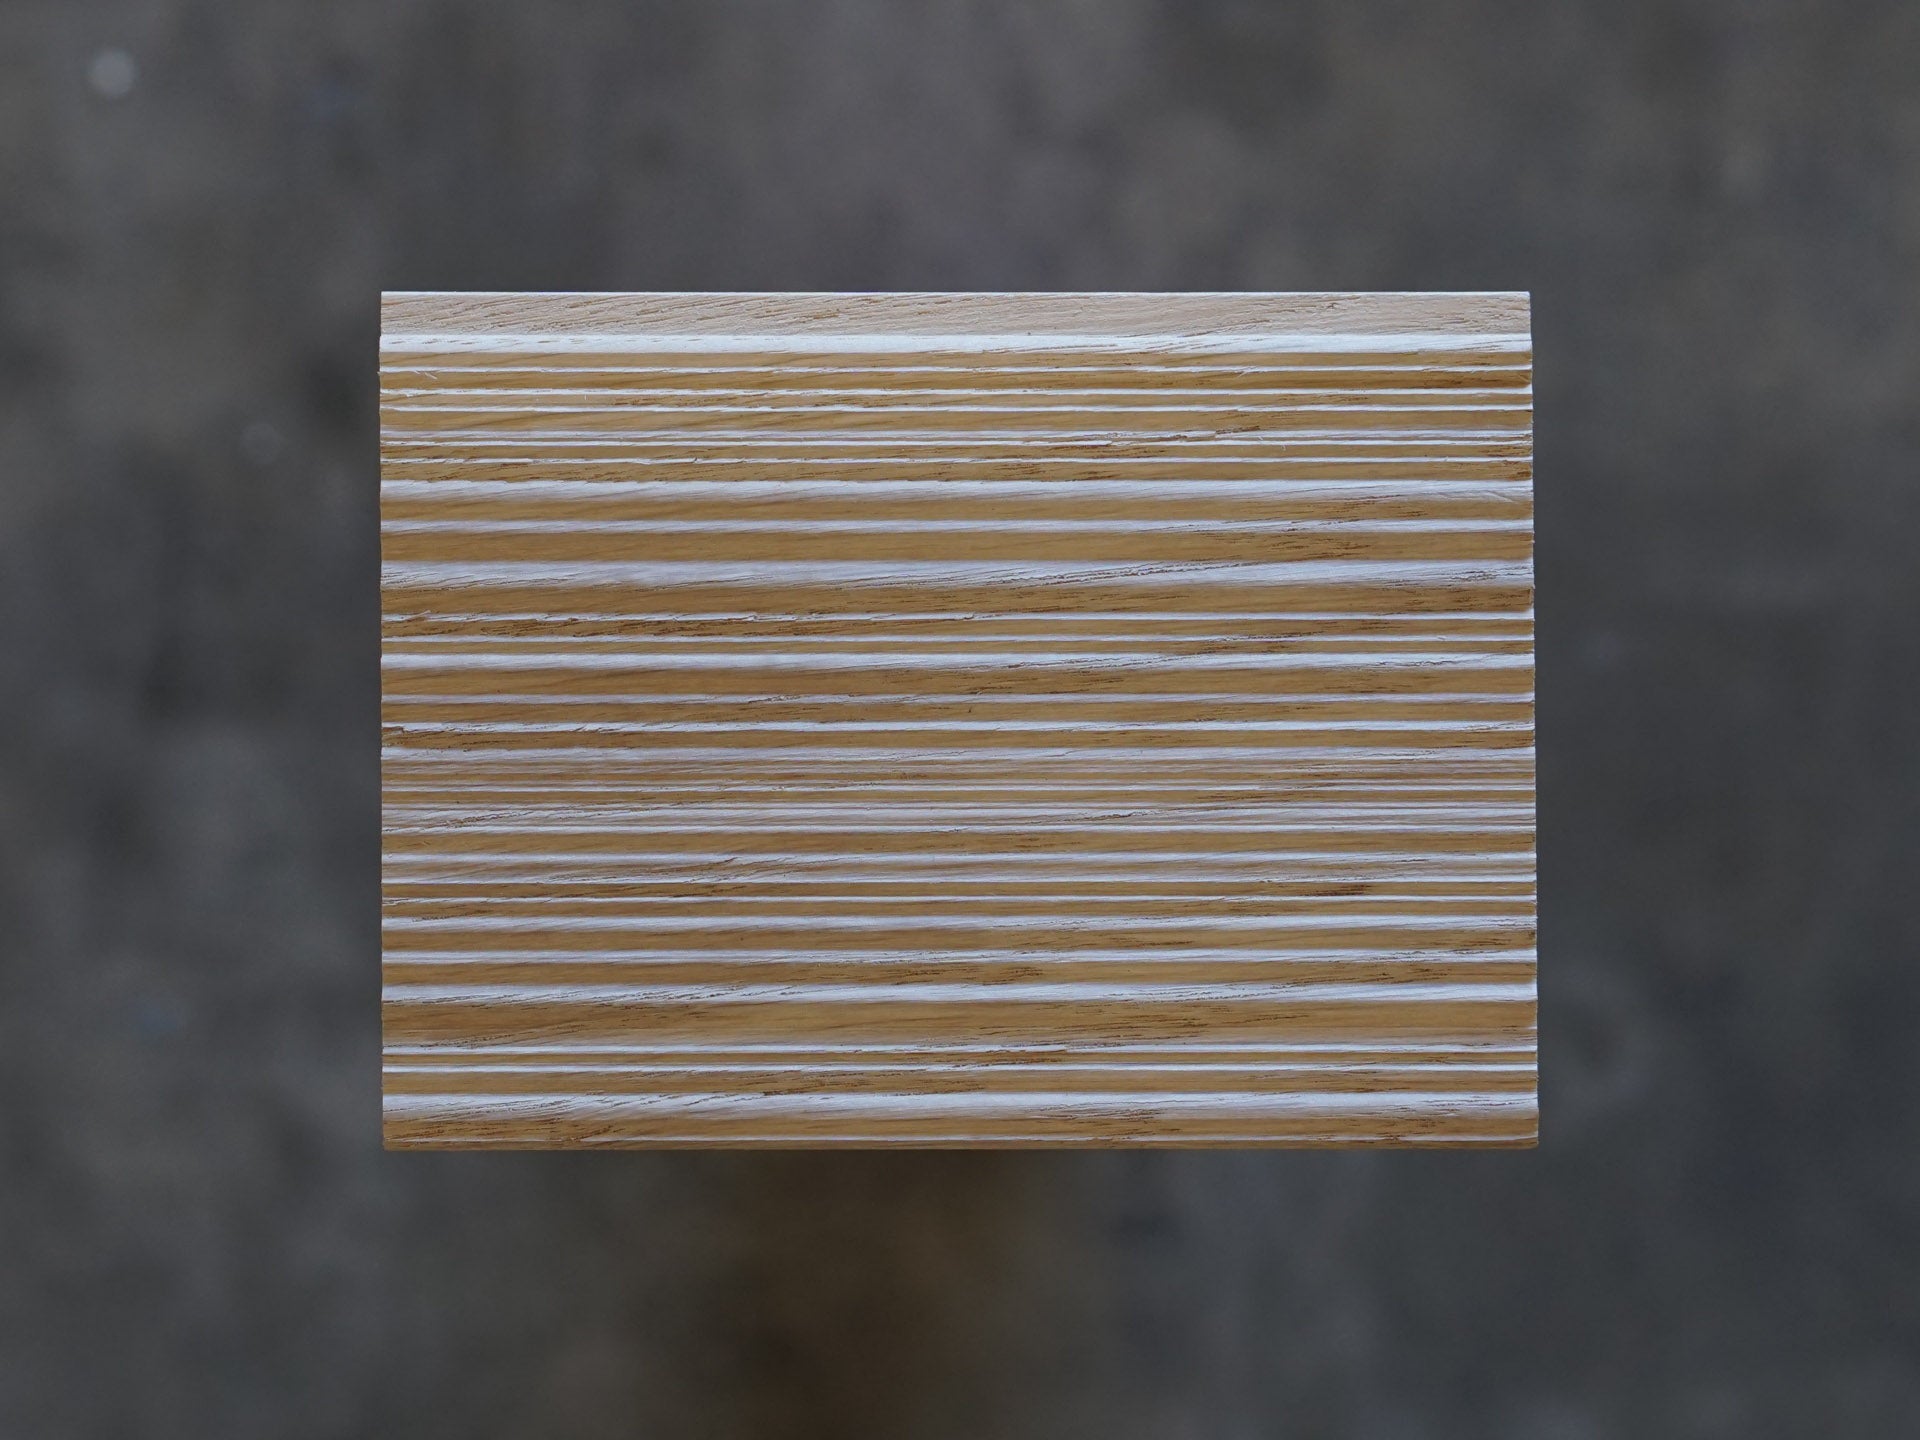 Top down of Weldtex tongue & groove white oak hardwood plank consisting of a combed, striated, brushed wood appearance common in mid-century modern homes and design